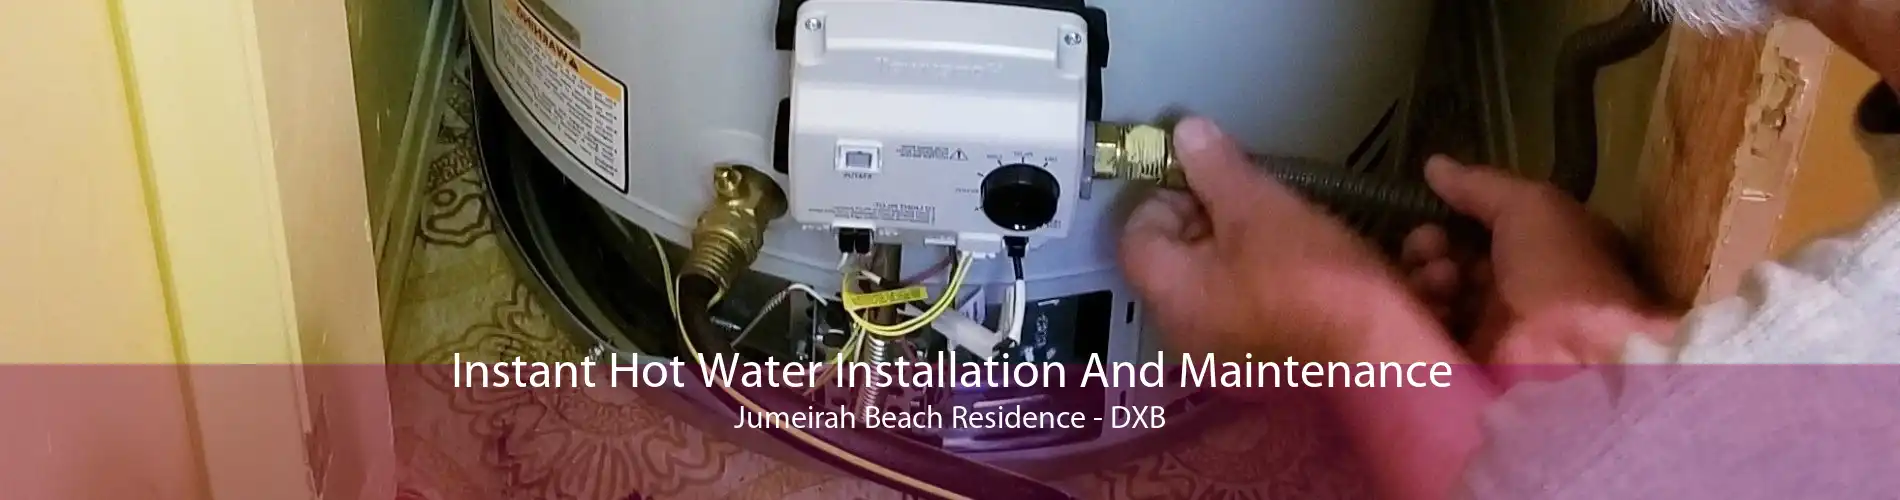 Instant Hot Water Installation And Maintenance Jumeirah Beach Residence - DXB